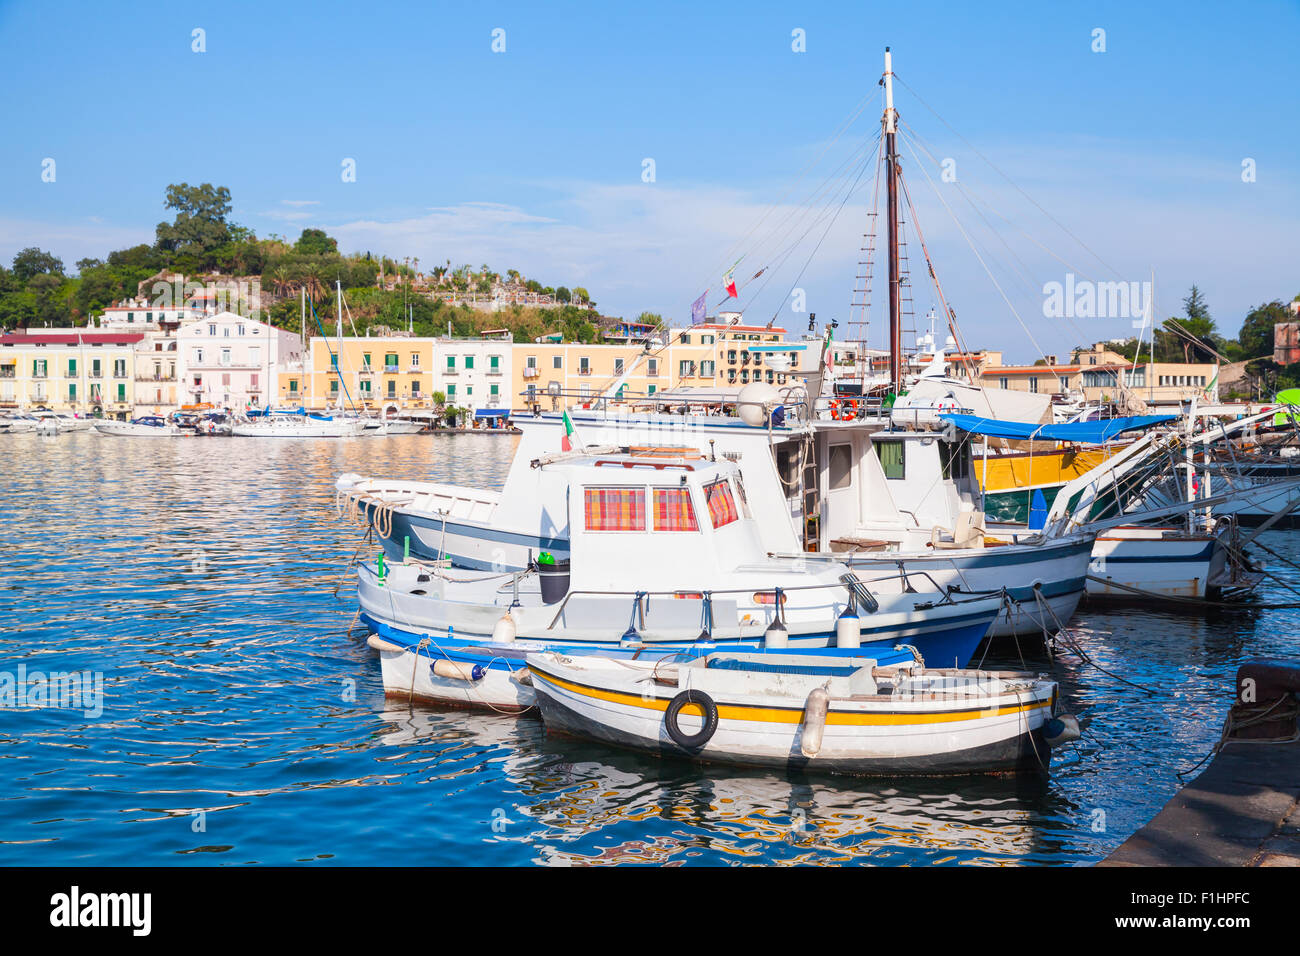 Moored small fishing boats in old Ischia port, Italy Stock Photo